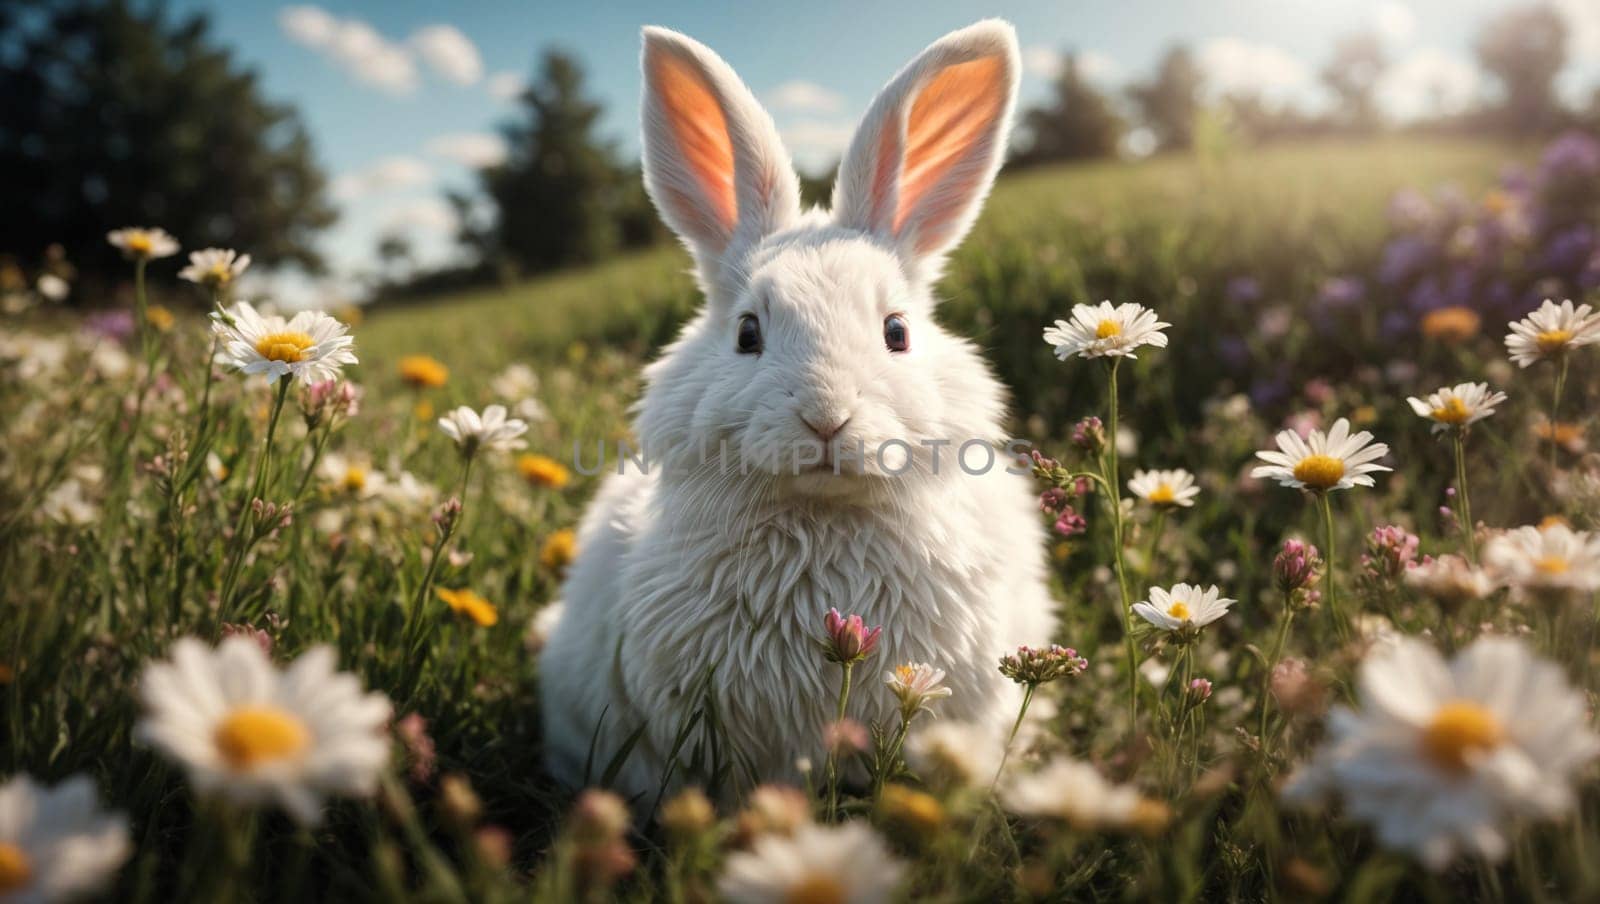 Cute white rabbit in a beautiful meadow with flowers by Севостьянов